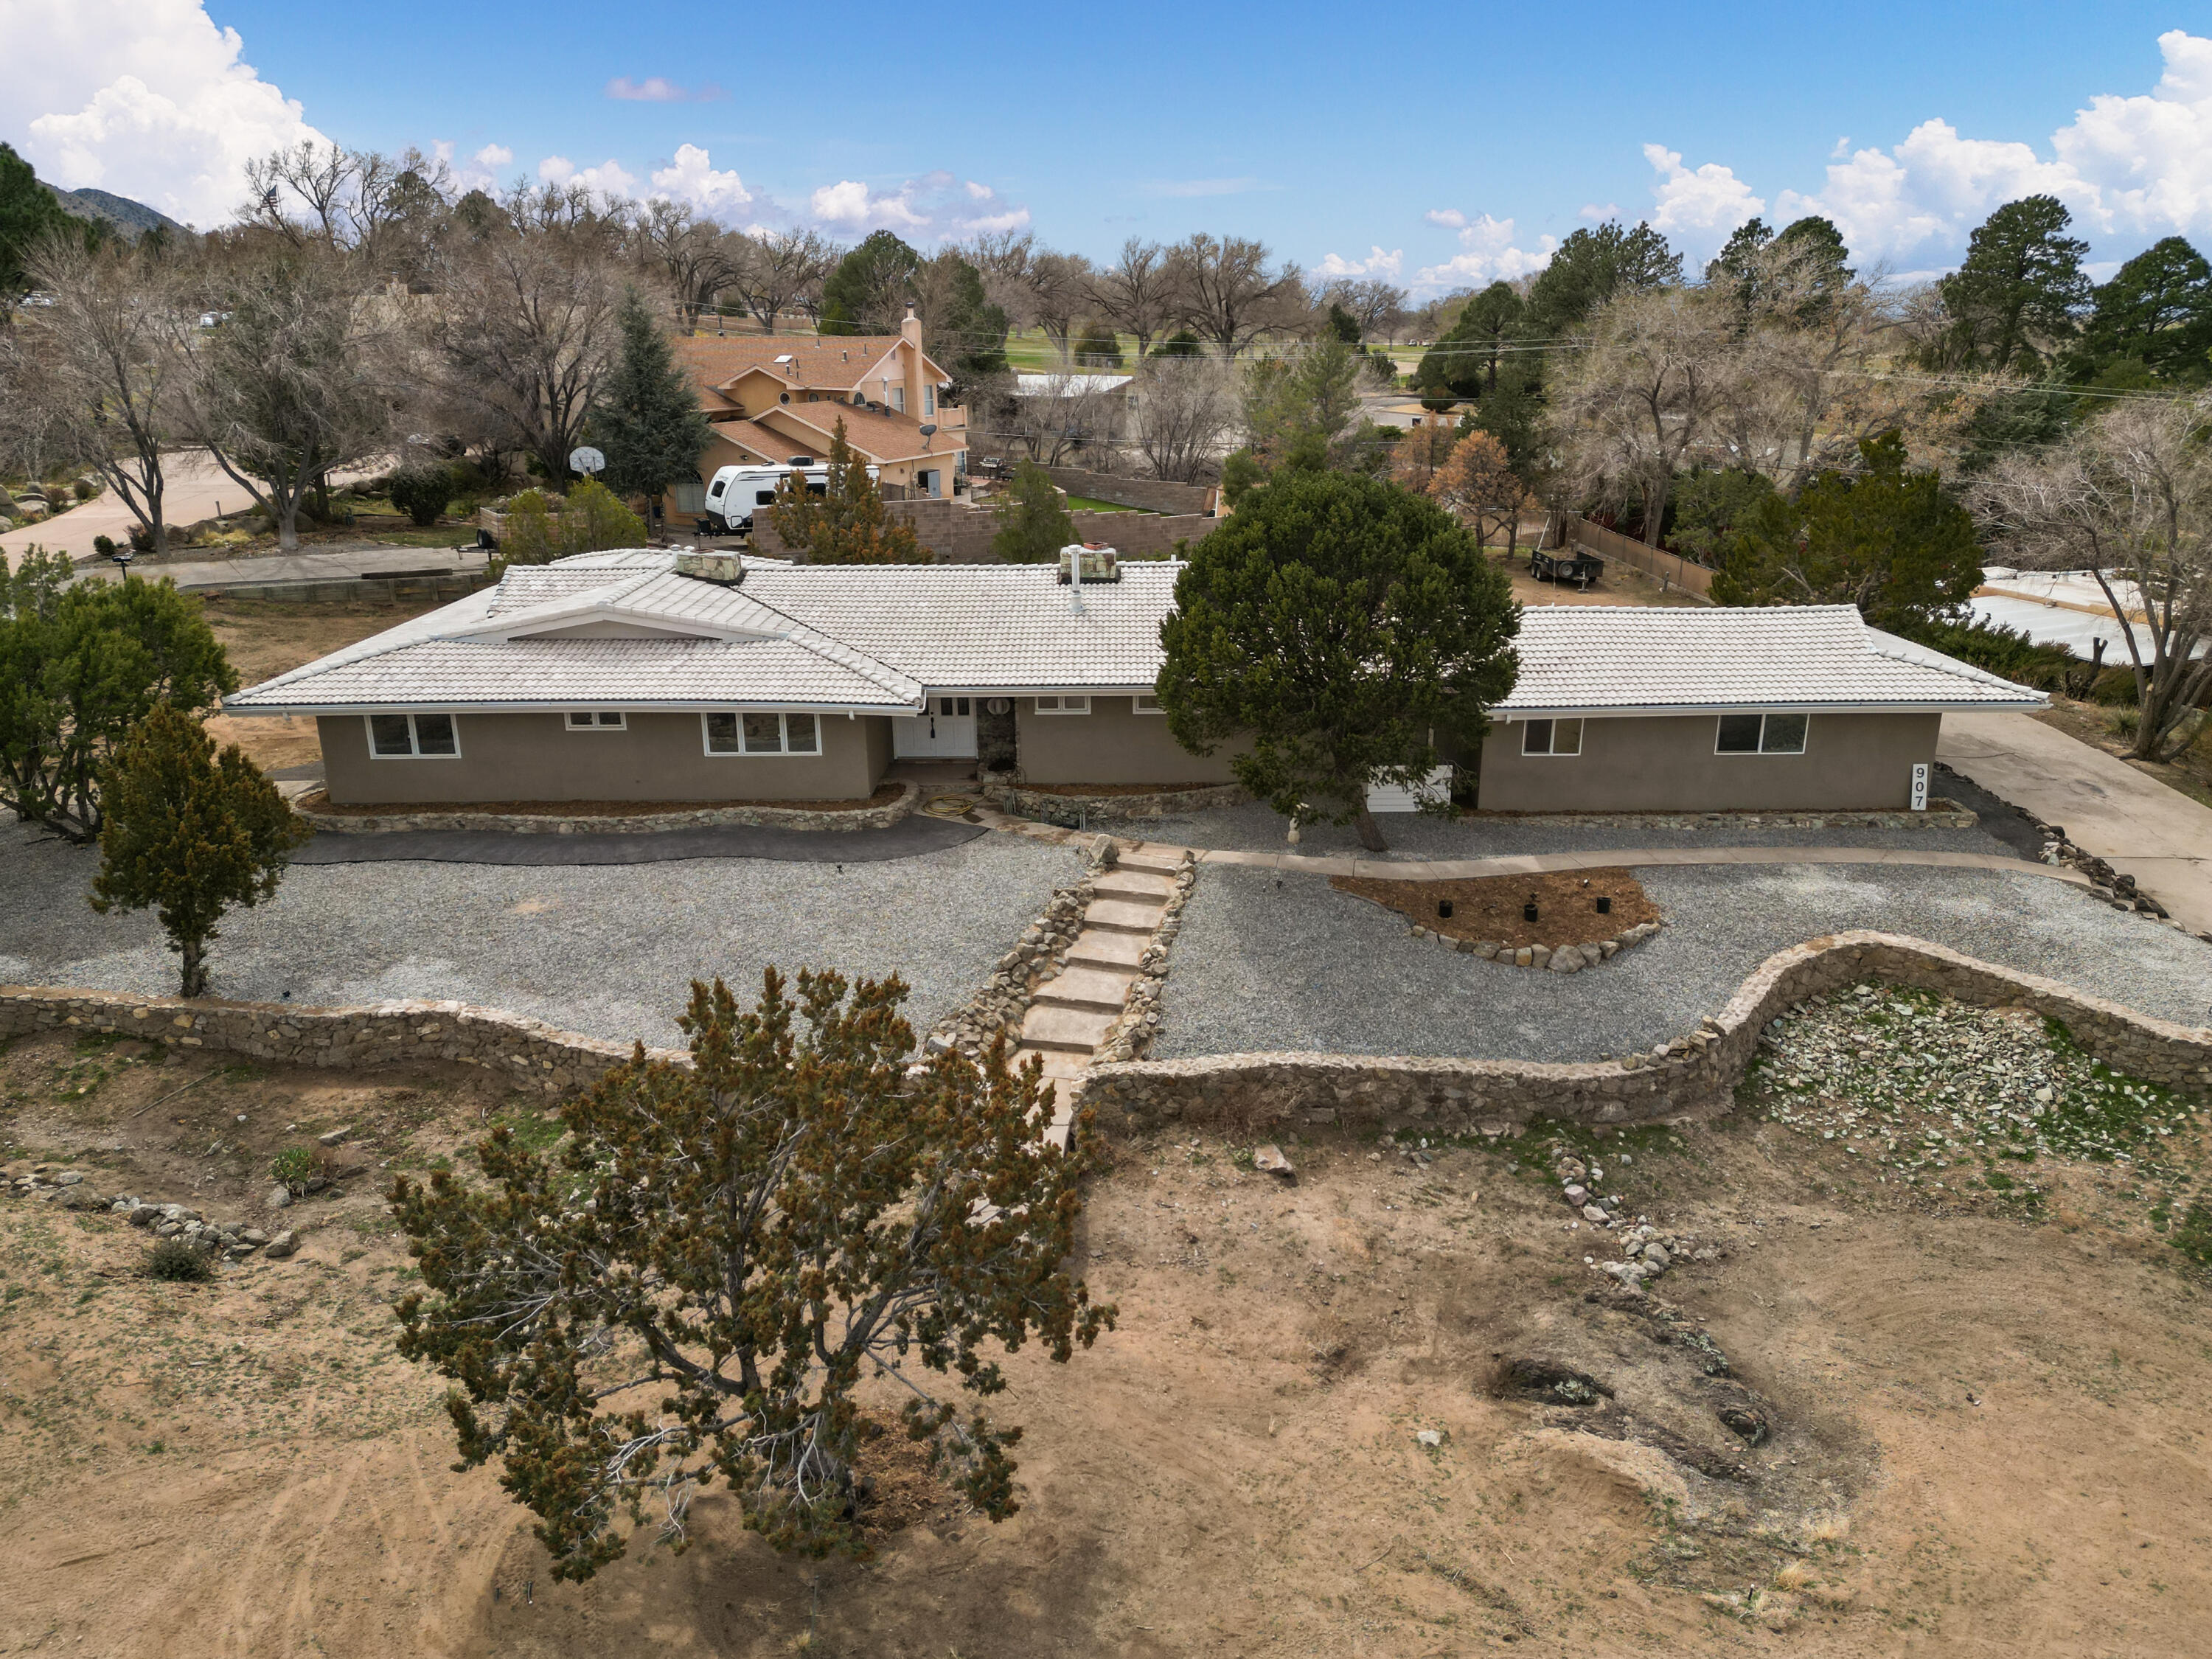 907 Stagecoach Road SE, Albuquerque, New Mexico 87123, 4 Bedrooms Bedrooms, ,3 BathroomsBathrooms,Residential,For Sale,907 Stagecoach Road SE,1058786